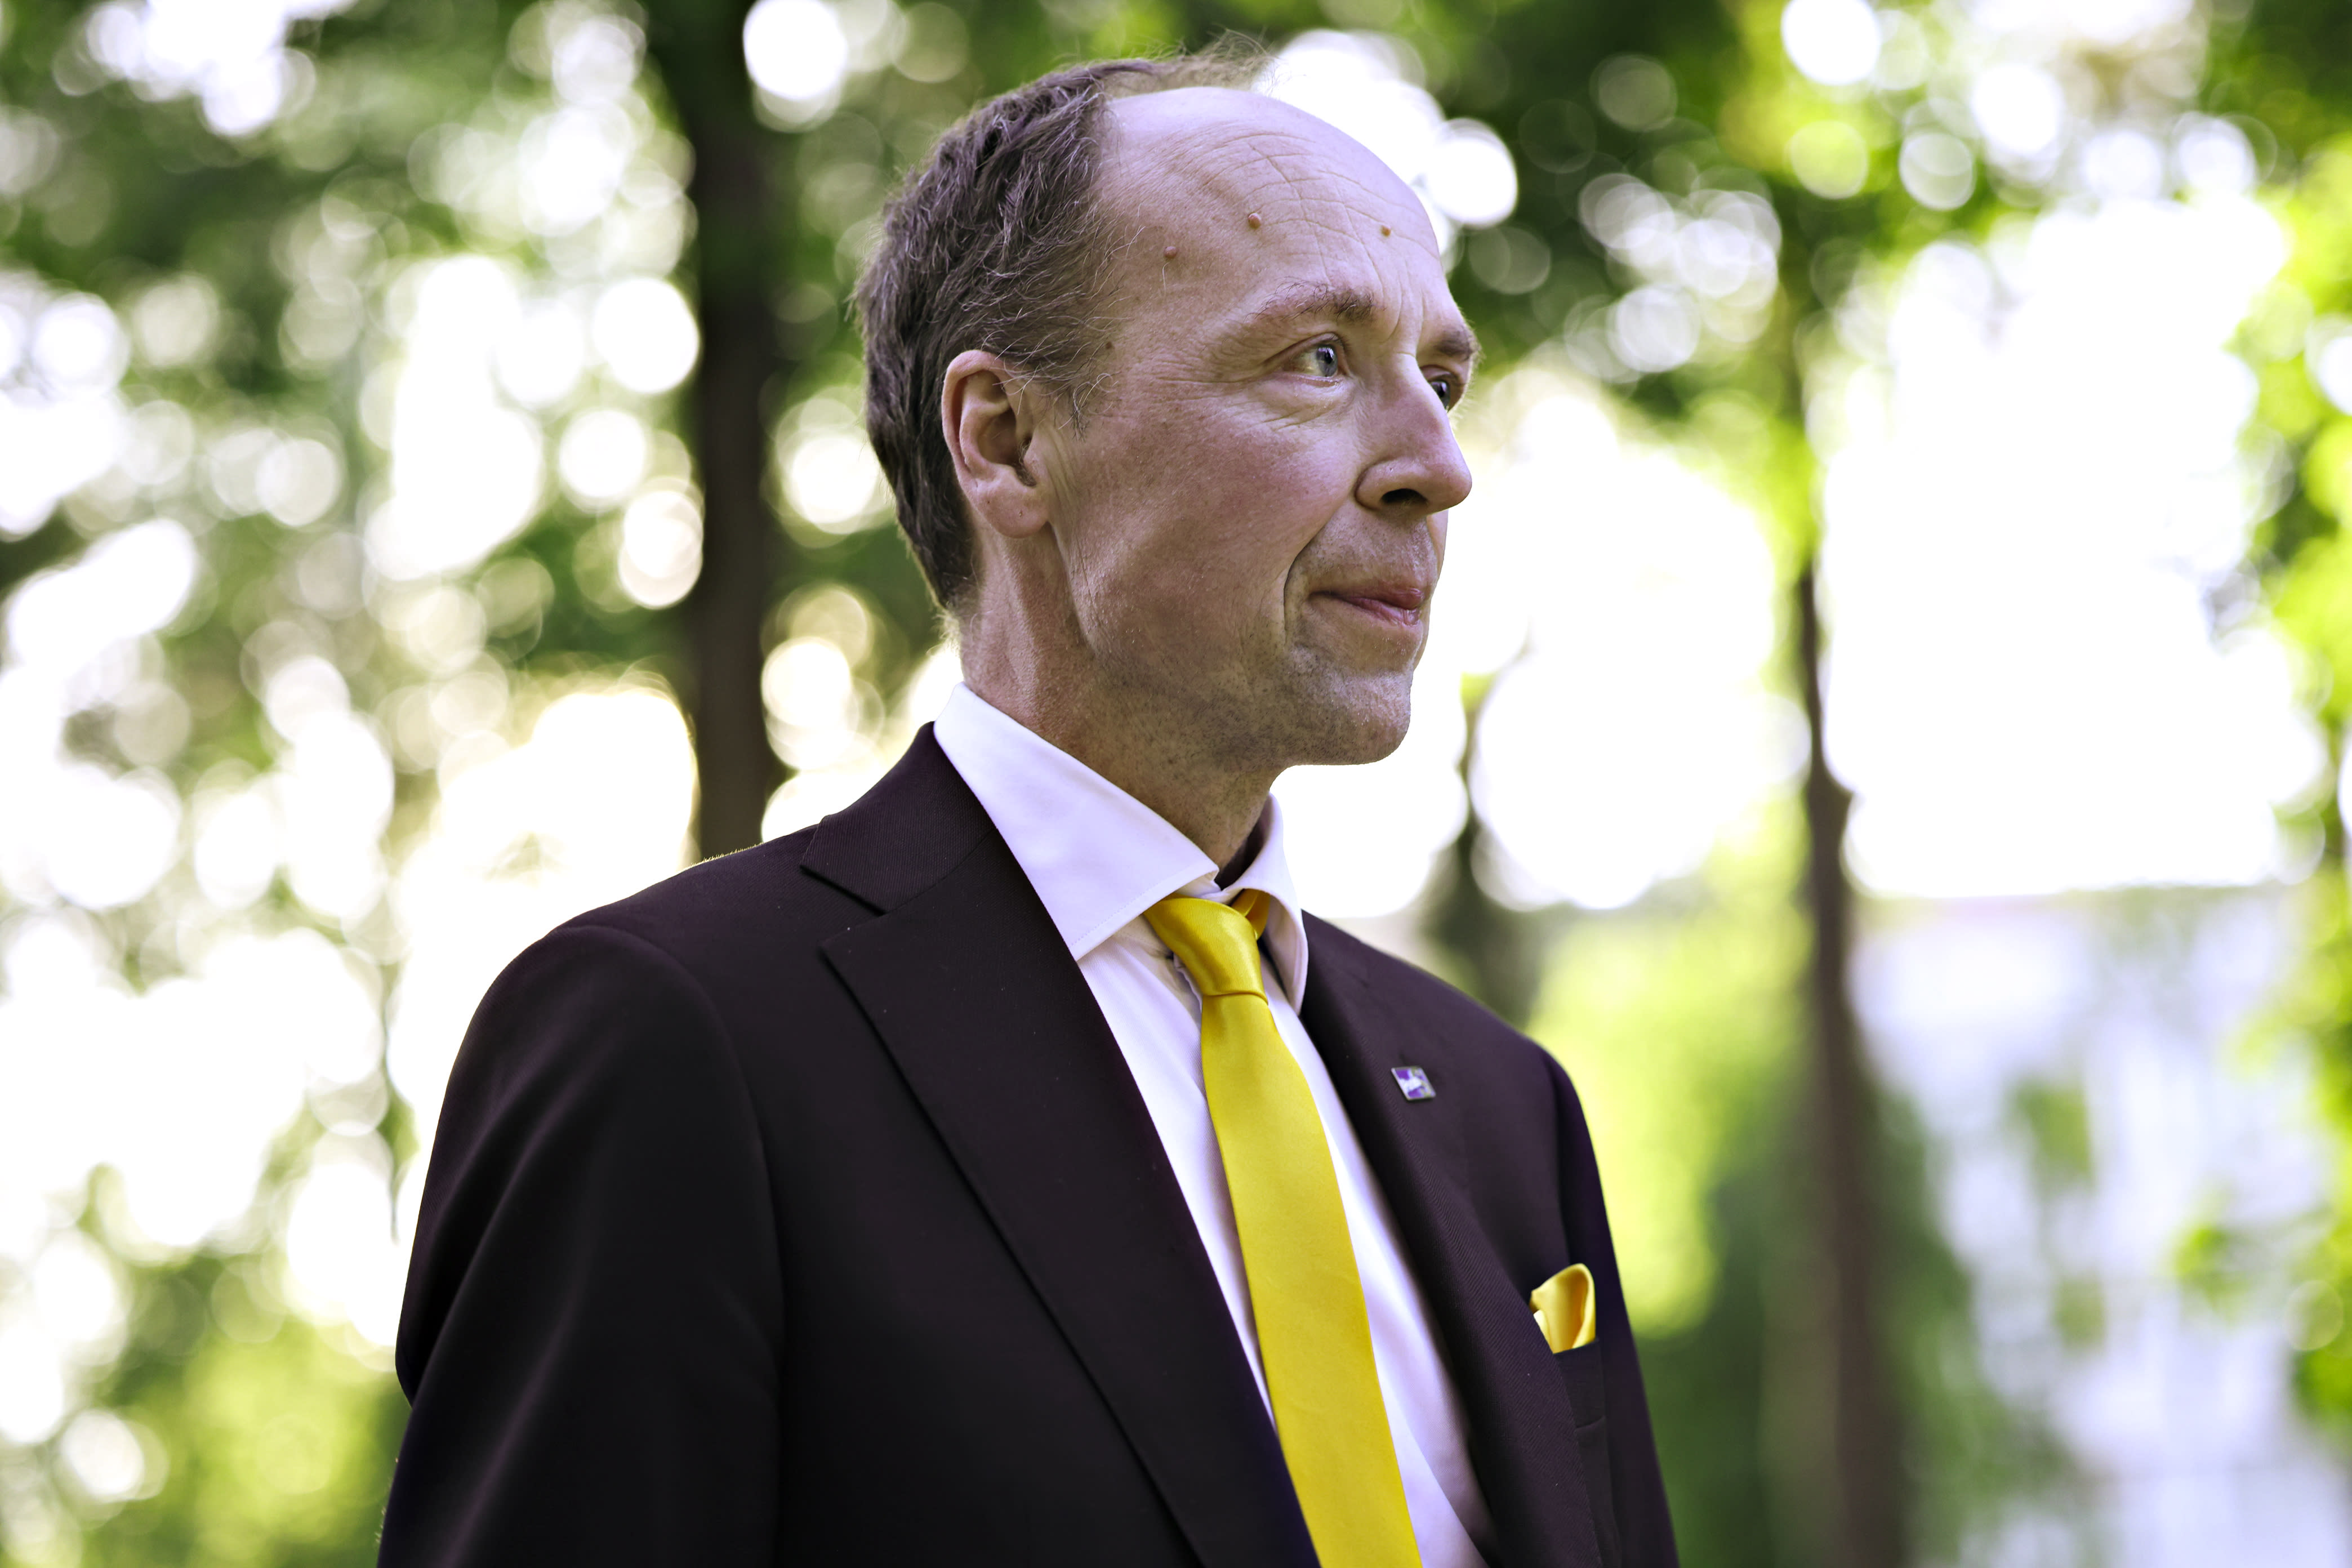 The leader of the Finnish party, Halla-aho, announces his intention to resign